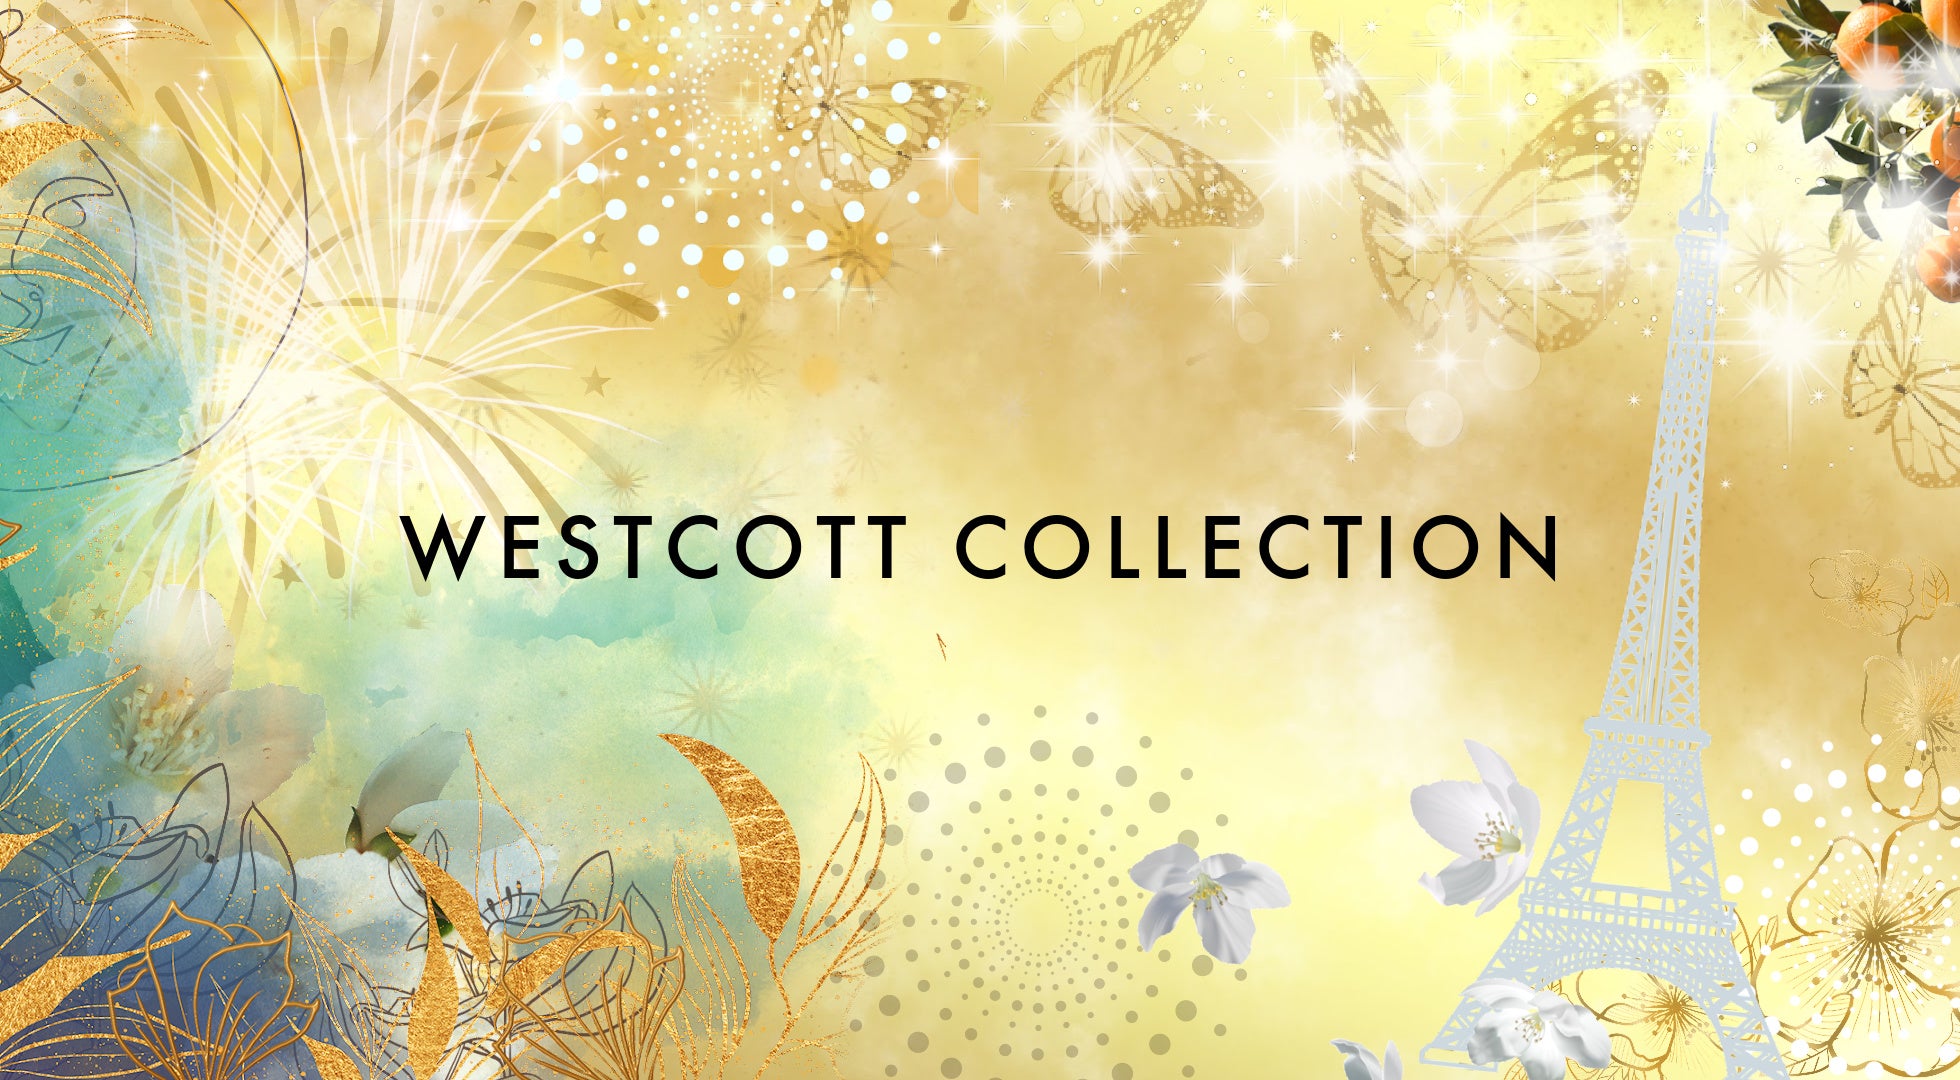 Westcott Collection ~ luxurious, high-quality fragrances